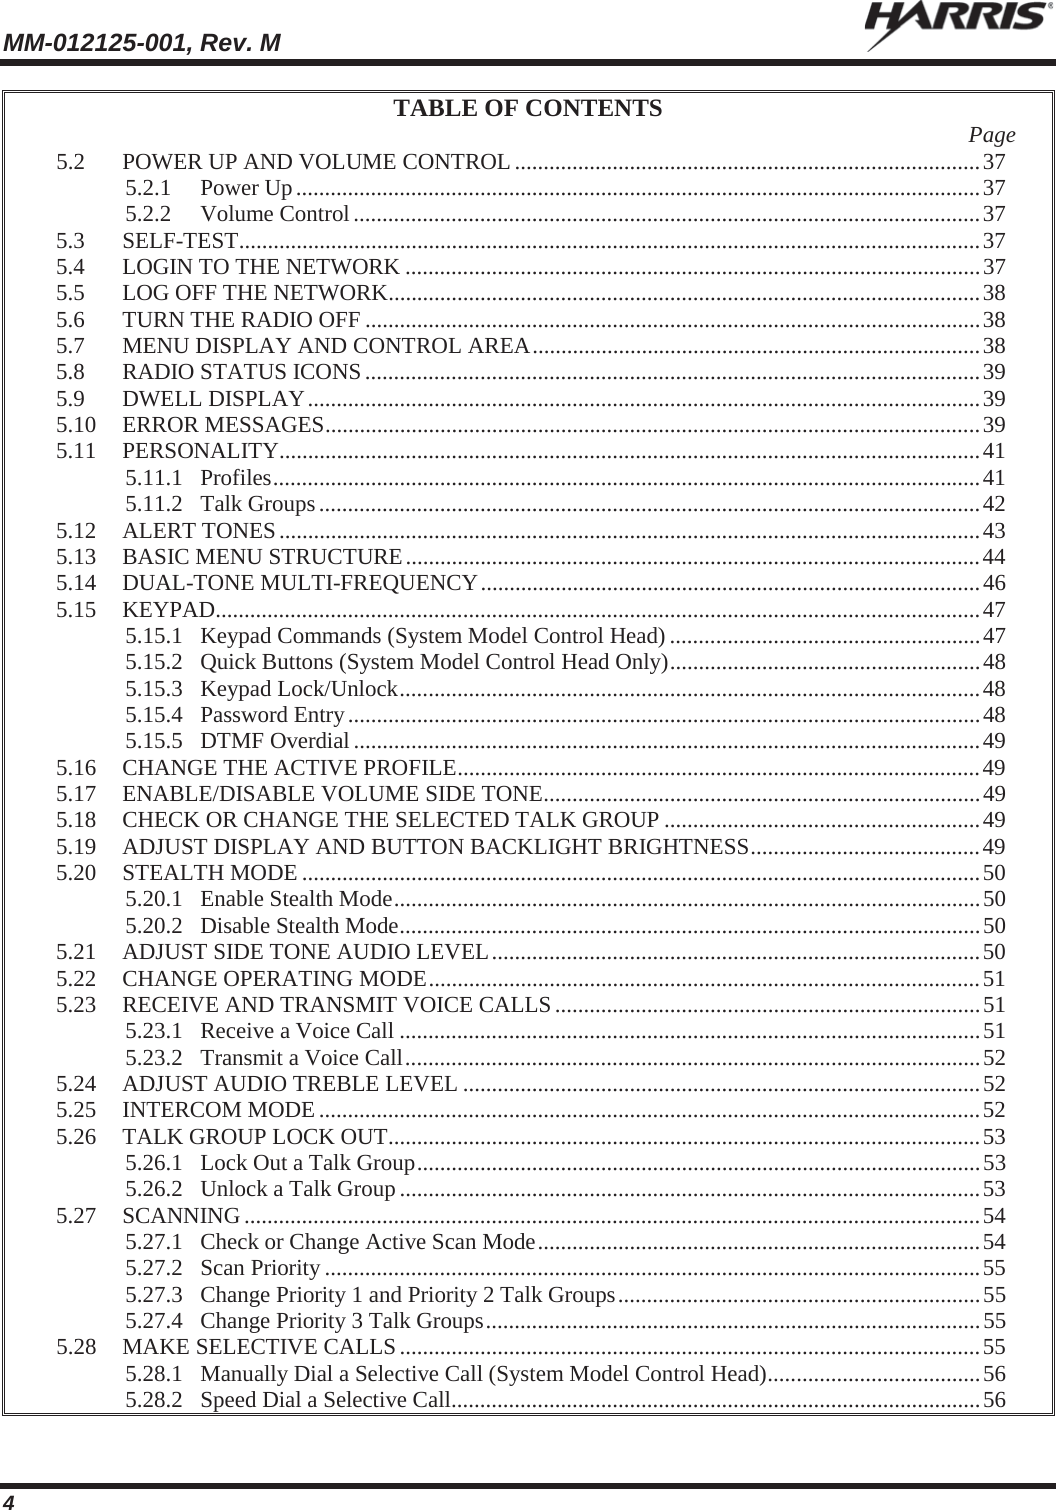 MM-012125-001, Rev. M   4 TABLE OF CONTENTS  Page 5.2 POWER UP AND VOLUME CONTROL ................................................................................. 37 5.2.1 Power Up ....................................................................................................................... 37 5.2.2 Volume Control ............................................................................................................. 37 5.3 SELF-TEST ................................................................................................................................. 37 5.4 LOGIN TO THE NETWORK .................................................................................................... 37 5.5 LOG OFF THE NETWORK ....................................................................................................... 38 5.6 TURN THE RADIO OFF ........................................................................................................... 38 5.7 MENU DISPLAY AND CONTROL AREA .............................................................................. 38 5.8 RADIO STATUS ICONS ........................................................................................................... 39 5.9 DWELL DISPLAY ..................................................................................................................... 39 5.10 ERROR MESSAGES .................................................................................................................. 39 5.11 PERSONALITY.......................................................................................................................... 41 5.11.1 Profiles ........................................................................................................................... 41 5.11.2 Talk Groups ................................................................................................................... 42 5.12 ALERT TONES .......................................................................................................................... 43 5.13 BASIC MENU STRUCTURE .................................................................................................... 44 5.14 DUAL-TONE MULTI-FREQUENCY ....................................................................................... 46 5.15 KEYPAD ..................................................................................................................................... 47 5.15.1 Keypad Commands (System Model Control Head) ...................................................... 47 5.15.2 Quick Buttons (System Model Control Head Only) ...................................................... 48 5.15.3 Keypad Lock/Unlock ..................................................................................................... 48 5.15.4 Password Entry .............................................................................................................. 48 5.15.5 DTMF Overdial ............................................................................................................. 49 5.16 CHANGE THE ACTIVE PROFILE ........................................................................................... 49 5.17 ENABLE/DISABLE VOLUME SIDE TONE ............................................................................ 49 5.18 CHECK OR CHANGE THE SELECTED TALK GROUP ....................................................... 49 5.19 ADJUST DISPLAY AND BUTTON BACKLIGHT BRIGHTNESS ........................................ 49 5.20 STEALTH MODE ...................................................................................................................... 50 5.20.1 Enable Stealth Mode ...................................................................................................... 50 5.20.2 Disable Stealth Mode ..................................................................................................... 50 5.21 ADJUST SIDE TONE AUDIO LEVEL ..................................................................................... 50 5.22 CHANGE OPERATING MODE ................................................................................................ 51 5.23 RECEIVE AND TRANSMIT VOICE CALLS .......................................................................... 51 5.23.1 Receive a Voice Call ..................................................................................................... 51 5.23.2 Transmit a Voice Call .................................................................................................... 52 5.24 ADJUST AUDIO TREBLE LEVEL .......................................................................................... 52 5.25 INTERCOM MODE ................................................................................................................... 52 5.26 TALK GROUP LOCK OUT ....................................................................................................... 53 5.26.1 Lock Out a Talk Group .................................................................................................. 53 5.26.2 Unlock a Talk Group ..................................................................................................... 53 5.27 SCANNING ................................................................................................................................ 54 5.27.1 Check or Change Active Scan Mode ............................................................................. 54 5.27.2 Scan Priority .................................................................................................................. 55 5.27.3 Change Priority 1 and Priority 2 Talk Groups ............................................................... 55 5.27.4 Change Priority 3 Talk Groups ...................................................................................... 55 5.28 MAKE SELECTIVE CALLS ..................................................................................................... 55 5.28.1 Manually Dial a Selective Call (System Model Control Head) ..................................... 56 5.28.2 Speed Dial a Selective Call ............................................................................................ 56 